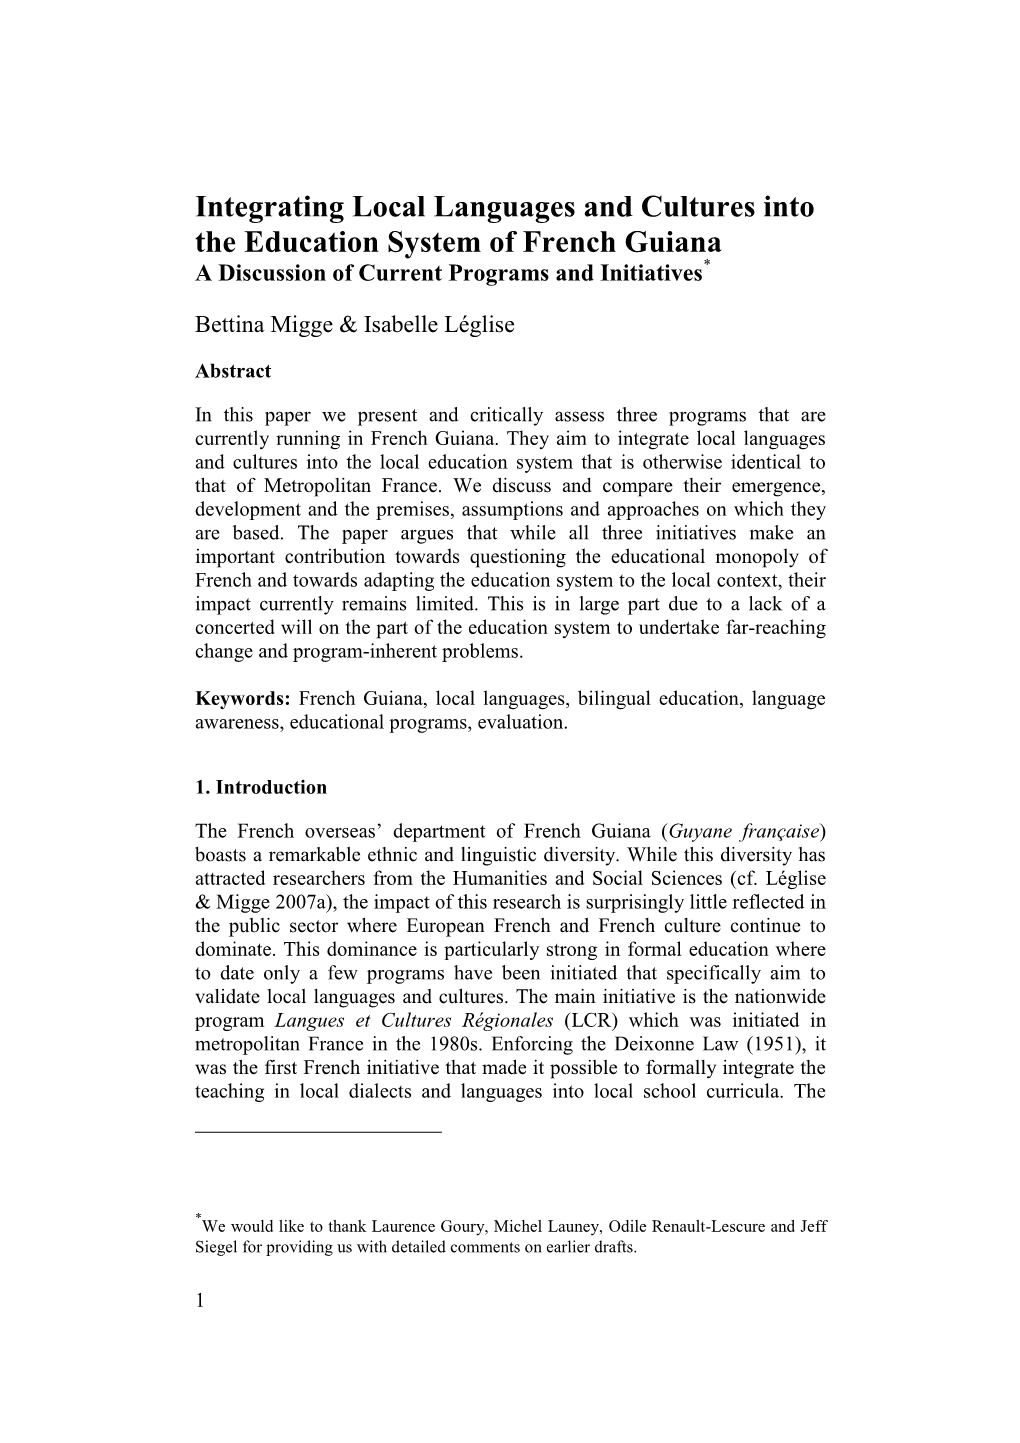 Integrating Local Languages and Cultures Into the Education System of French Guiana a Discussion of Current Programs and Initiatives*